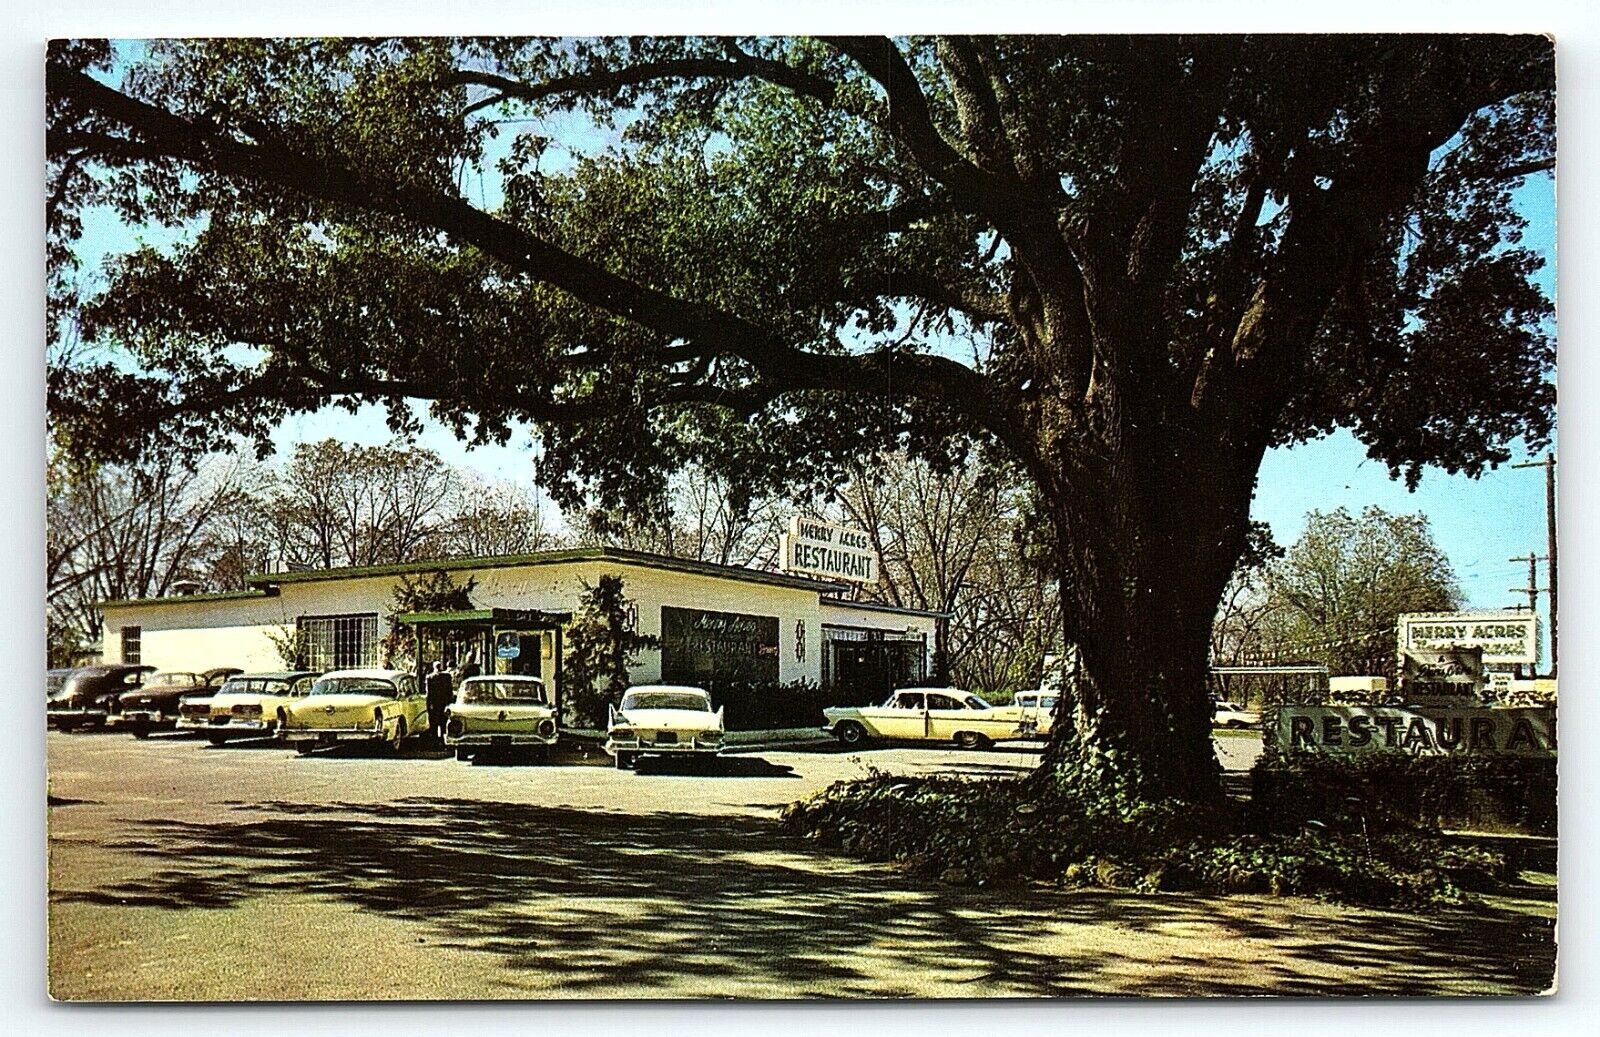 1950s ALBANY GA MERRY ACRES RESTAURANT HWY 82 OLD CARS UNPOSTED POSTCARD P3864